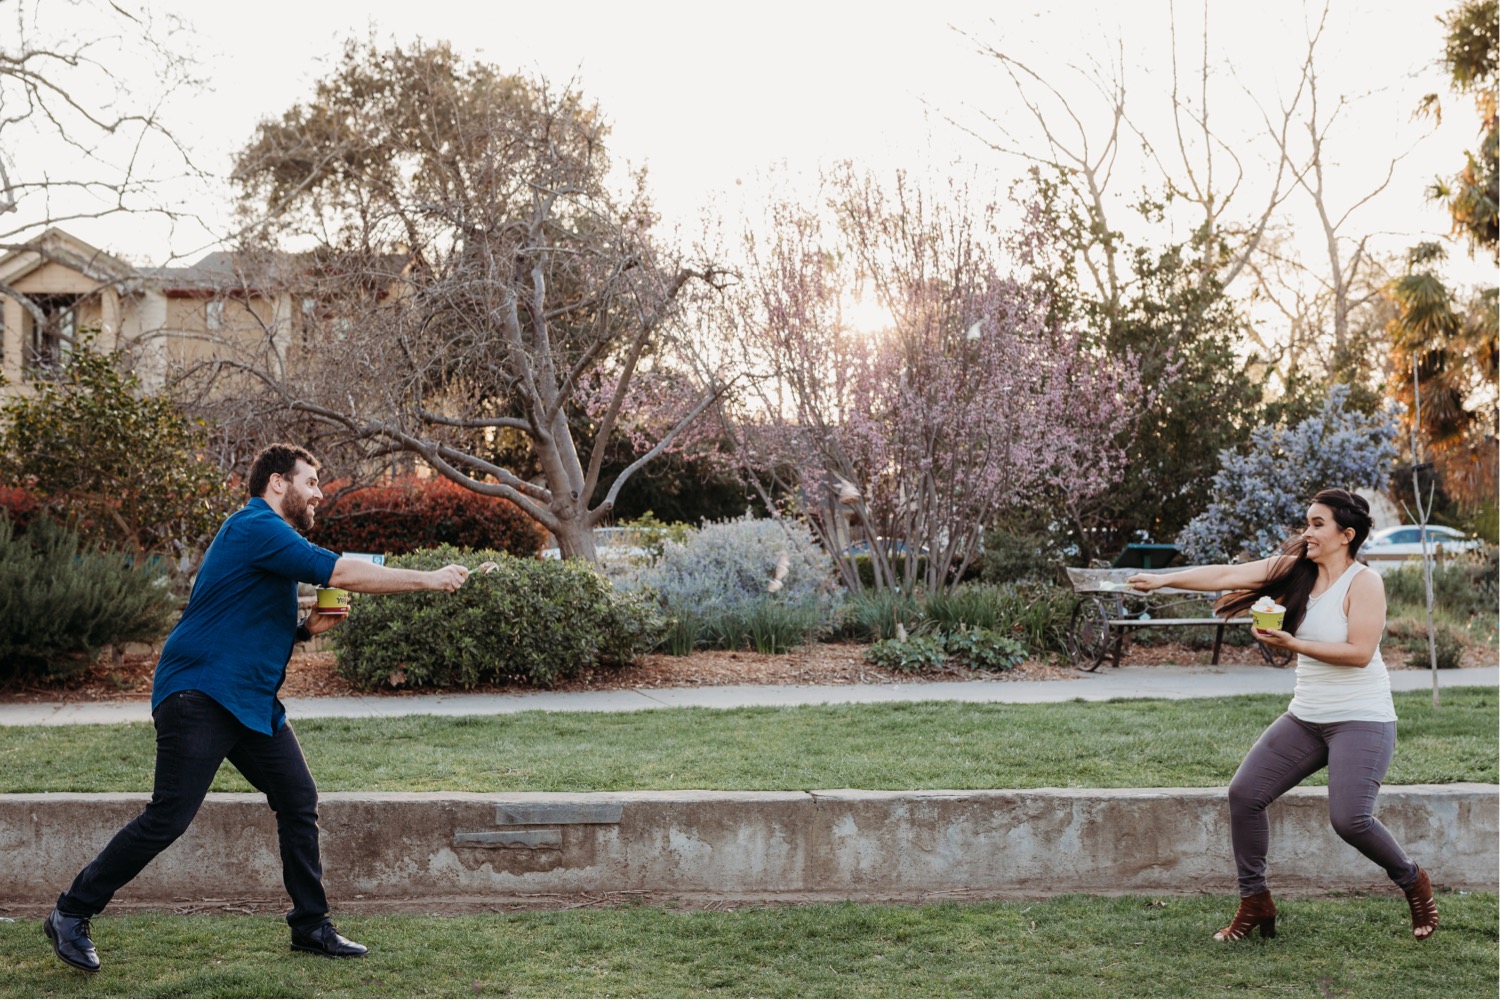 Couple stands far apart and throws frozen yogurt at each other starting an ice cream fight during their engagement photoshoot.